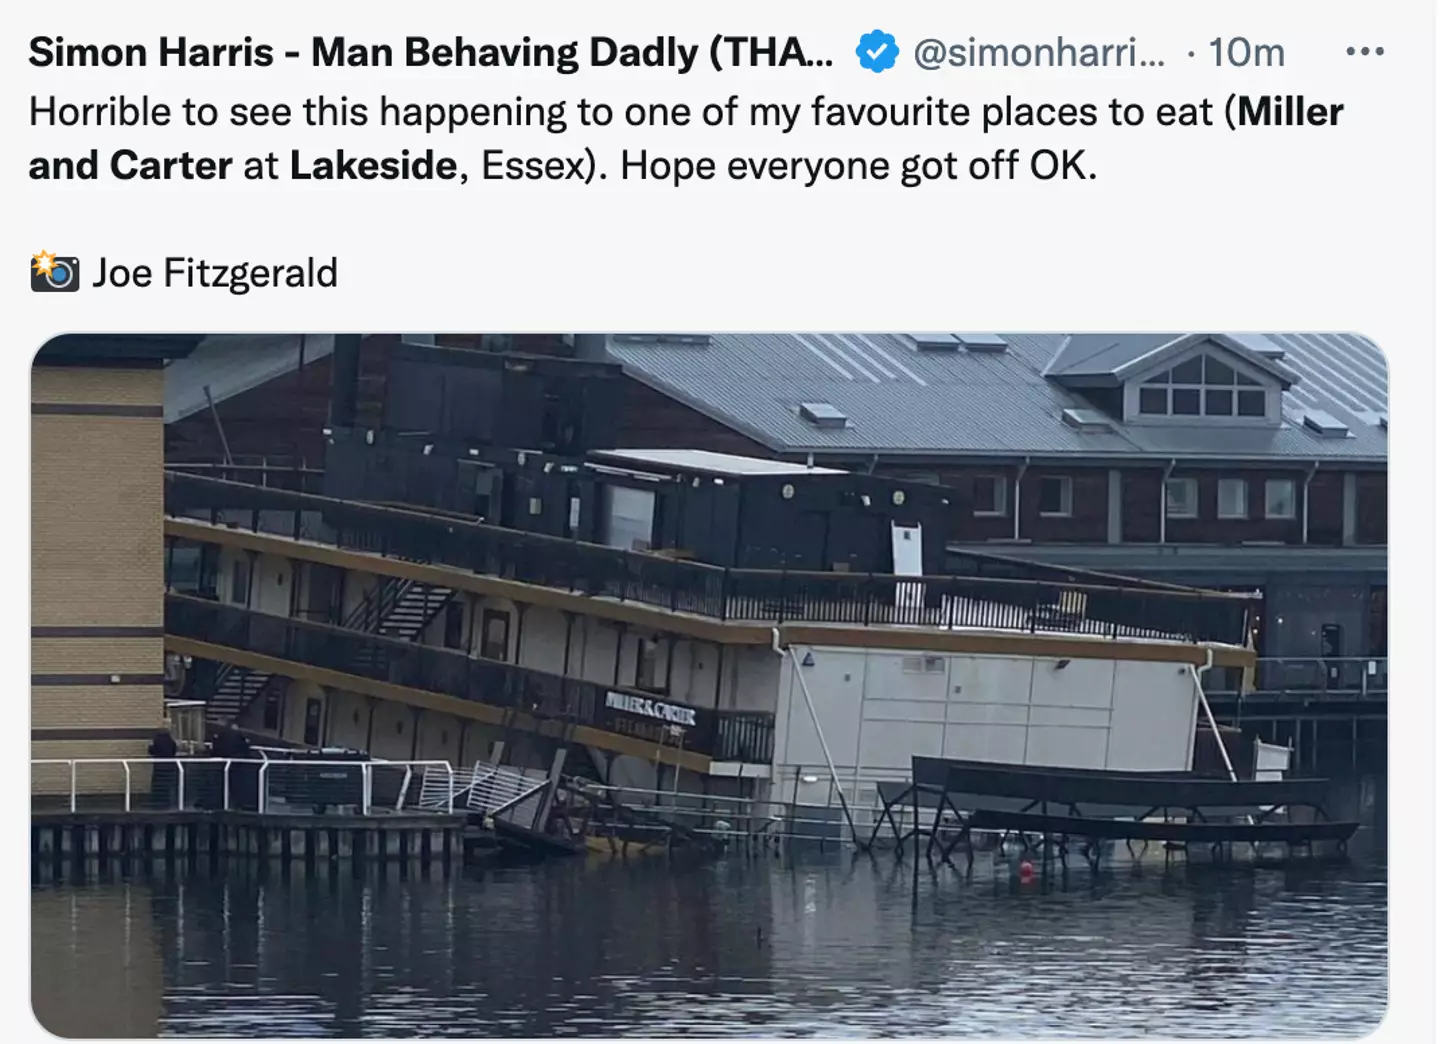 The restaurant appears to be half submerged in water.